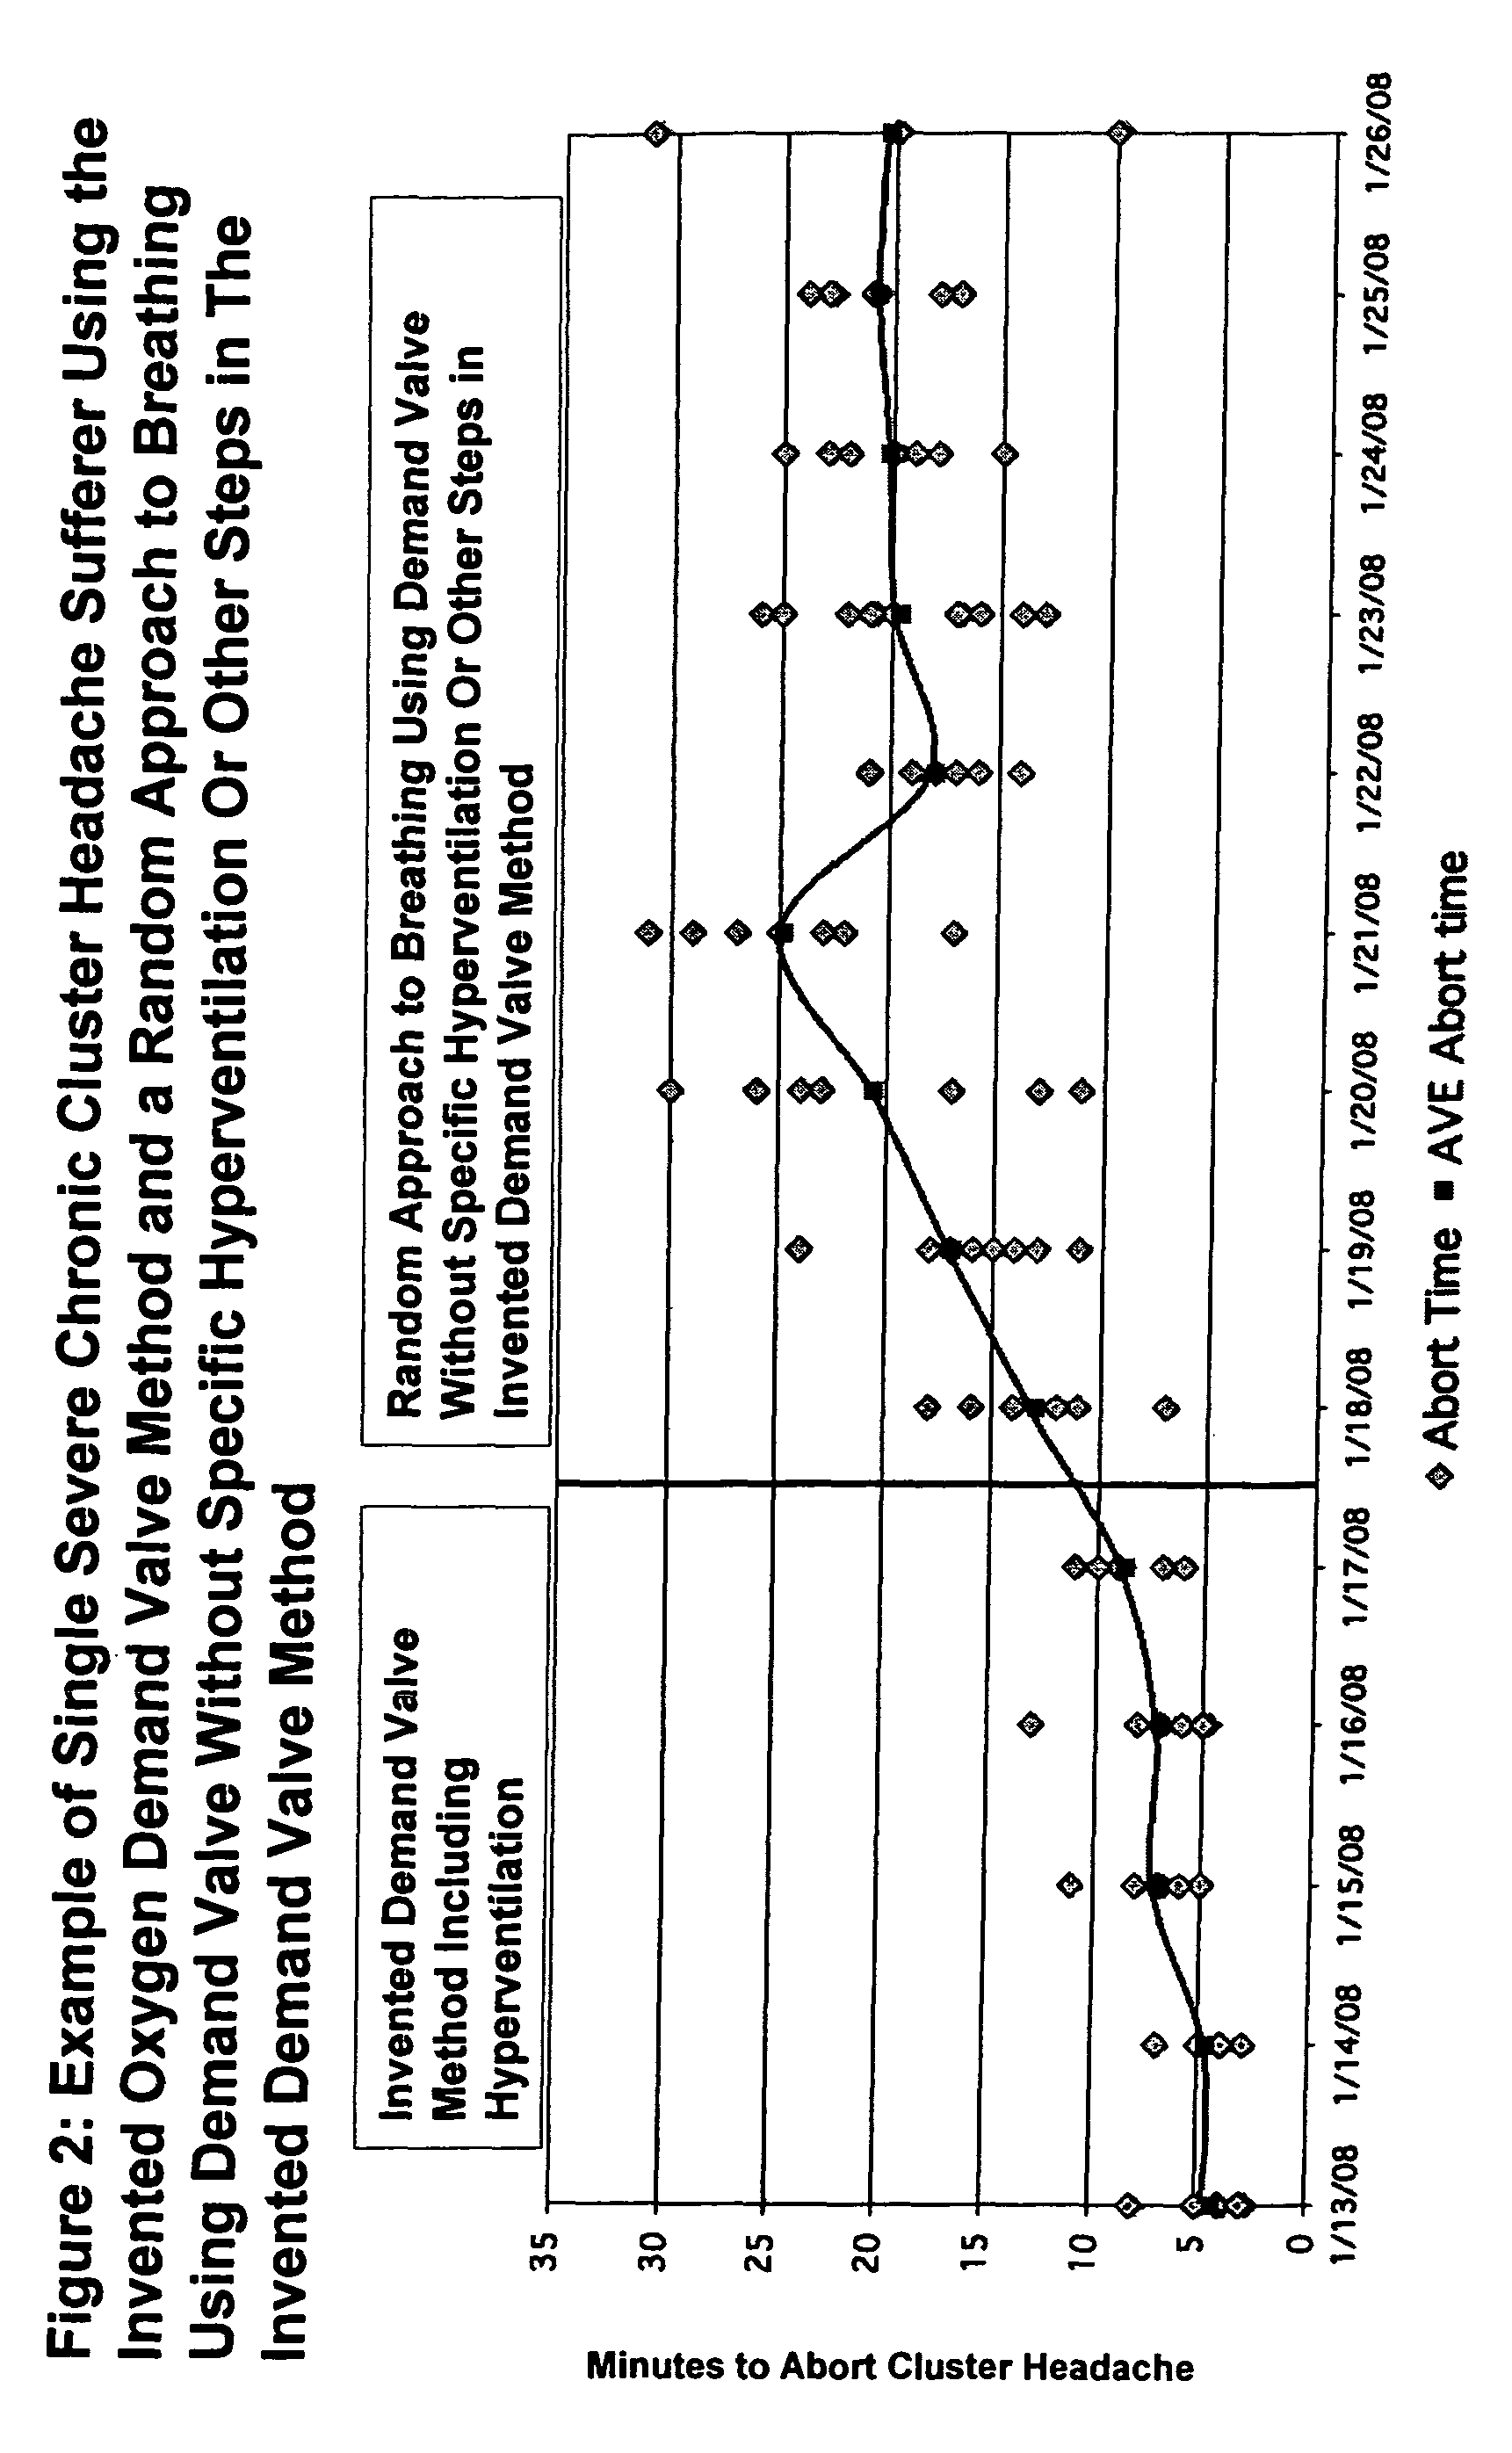 Method of demand valve oxygen therapy for rapid abort of cluster headache